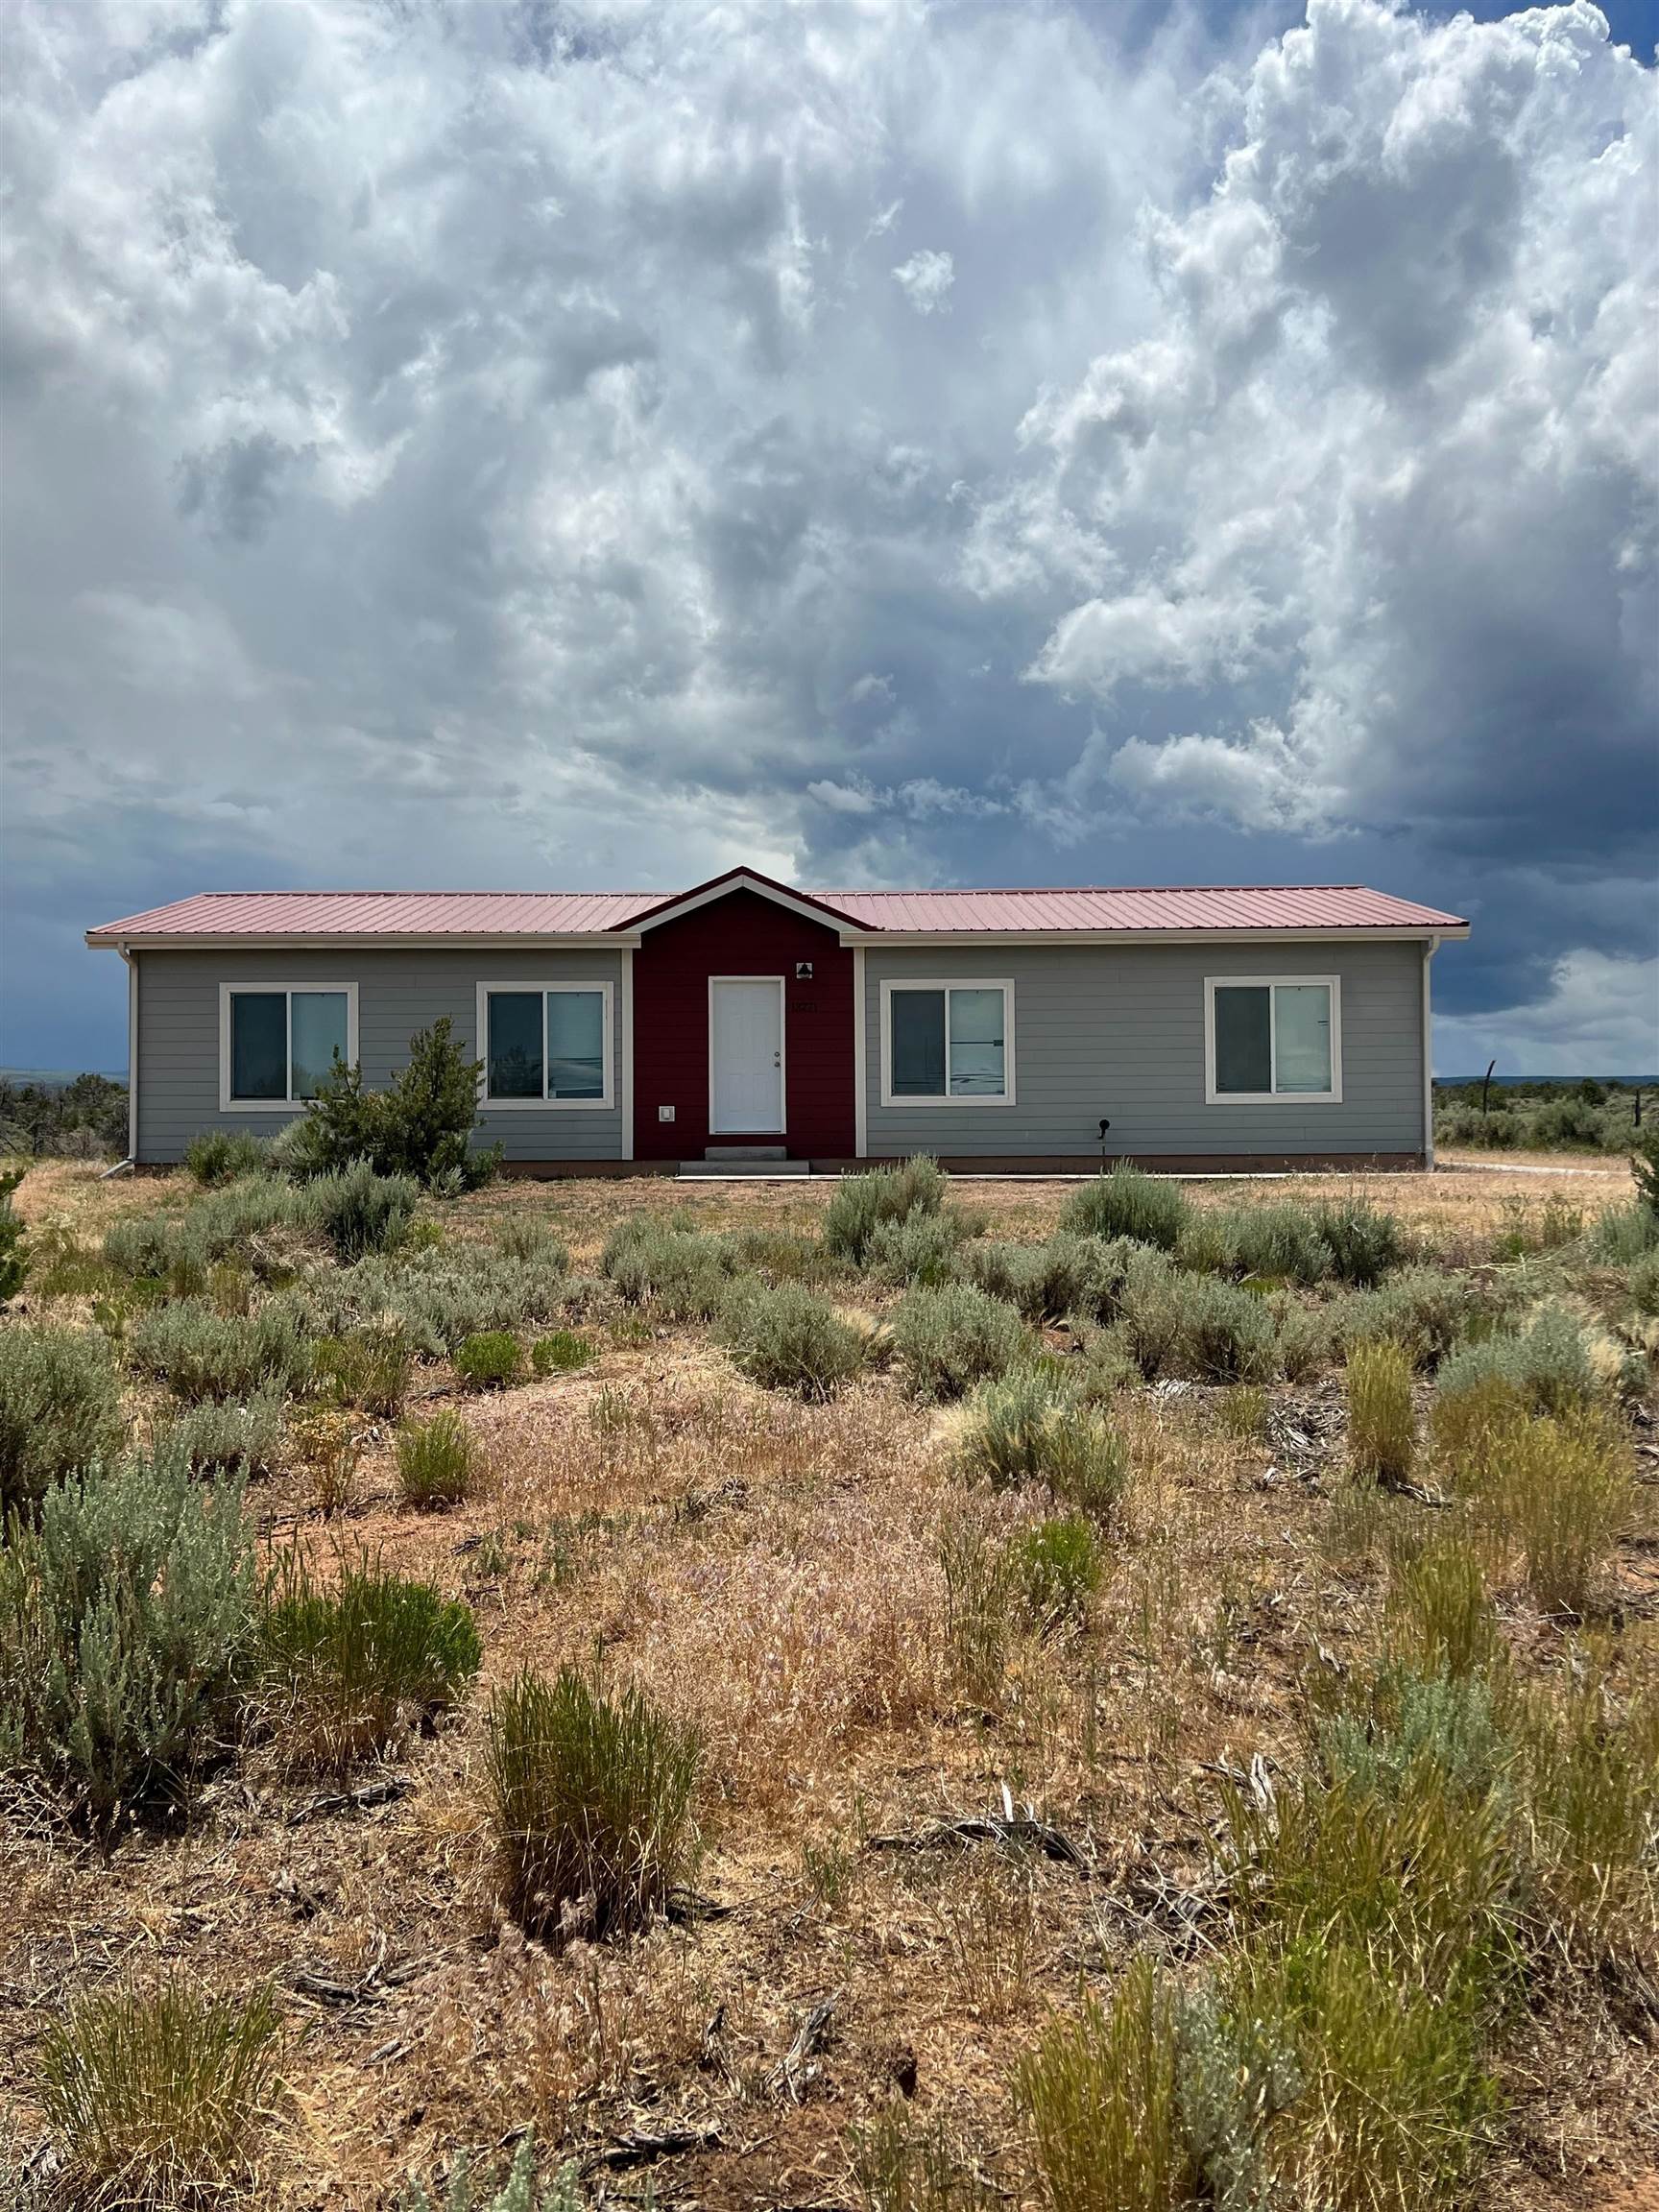 3 Bedroom, 2 bath, 1492 sq ft IRC modular on 35.1 acres on Glade Park!! 360 degree views from this 2016 built home refrigerated forced air A/C. 2 car garage and a truly a nice home with 2x6 walls, upgraded insulation! All kitchen appliances to include a gas range, side by side refrigerator, and dishwasher. You must get inside this home to really appreciate the comfort and quality it has to offer.